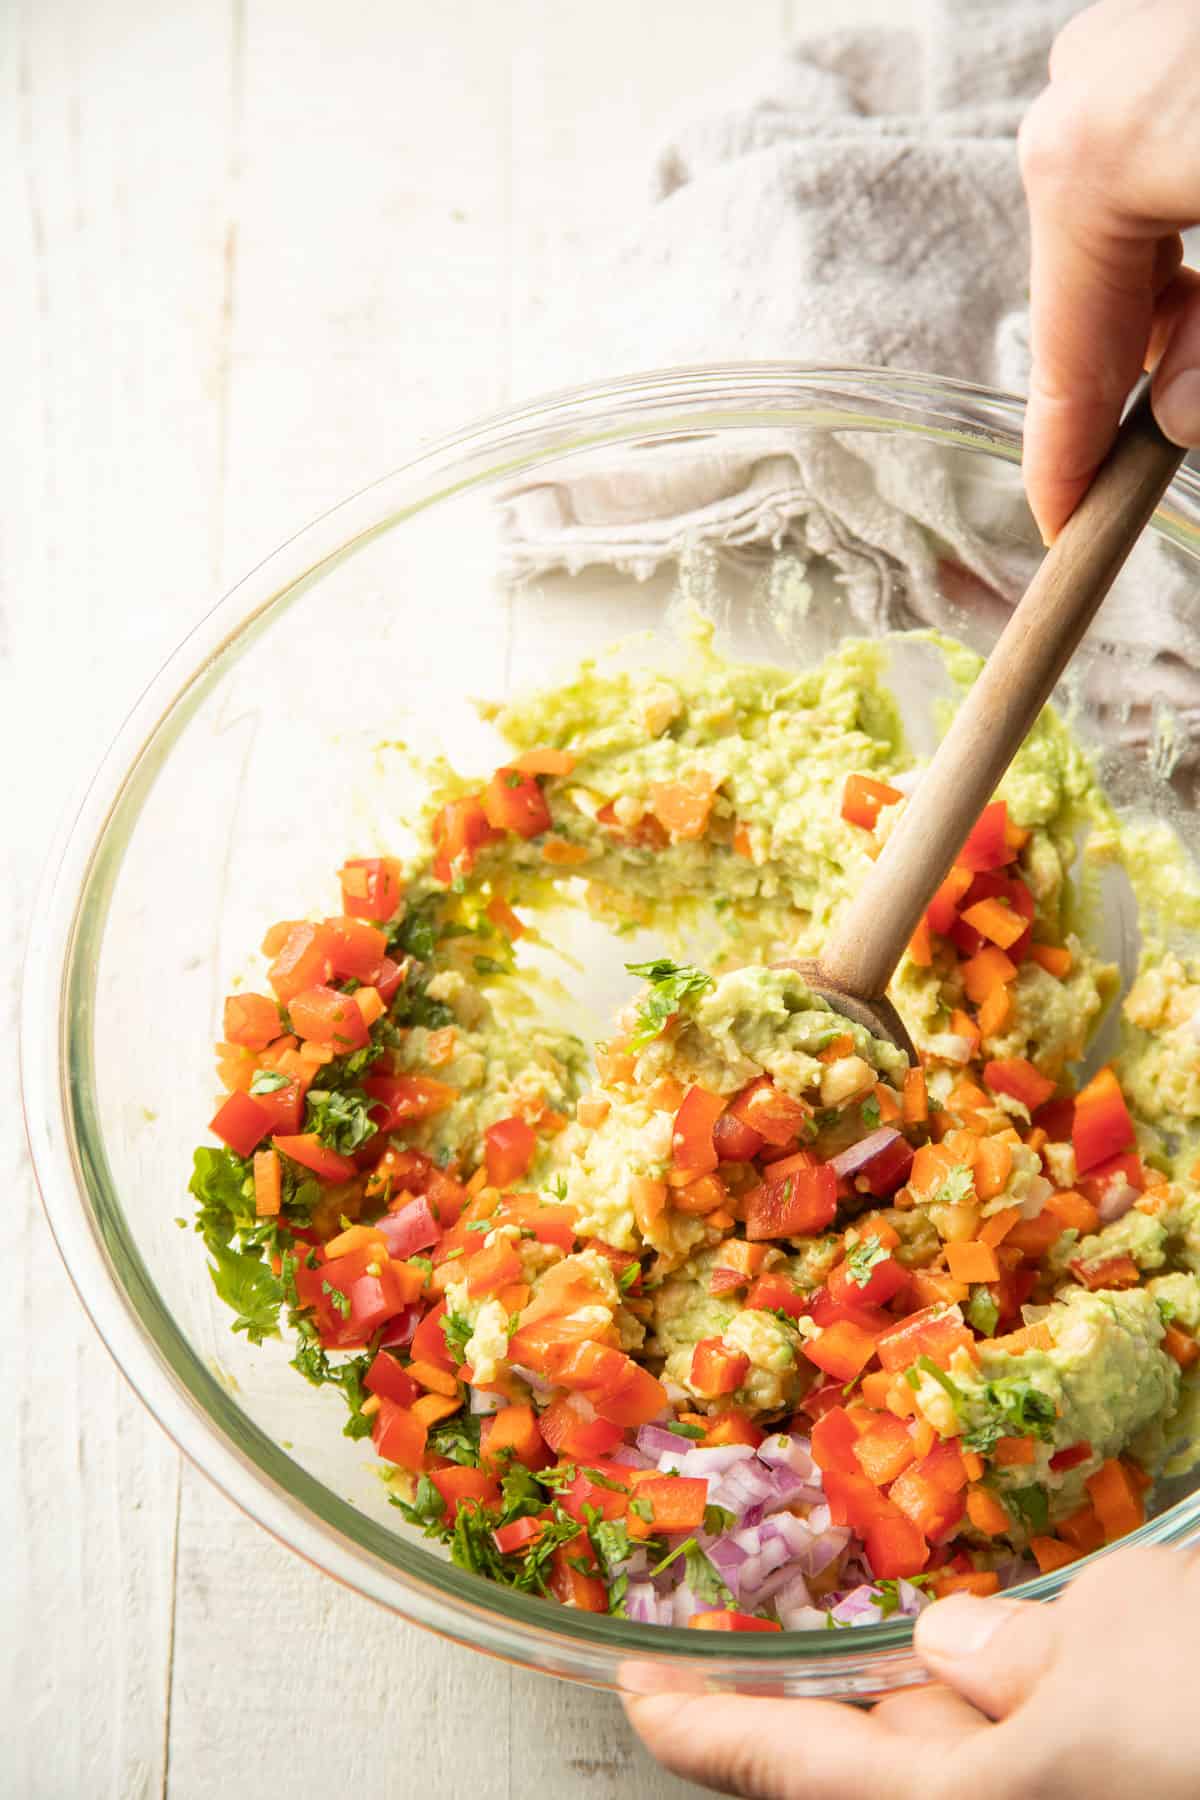 Hand stirring chickpea sandwich salad filling together in a bowl.